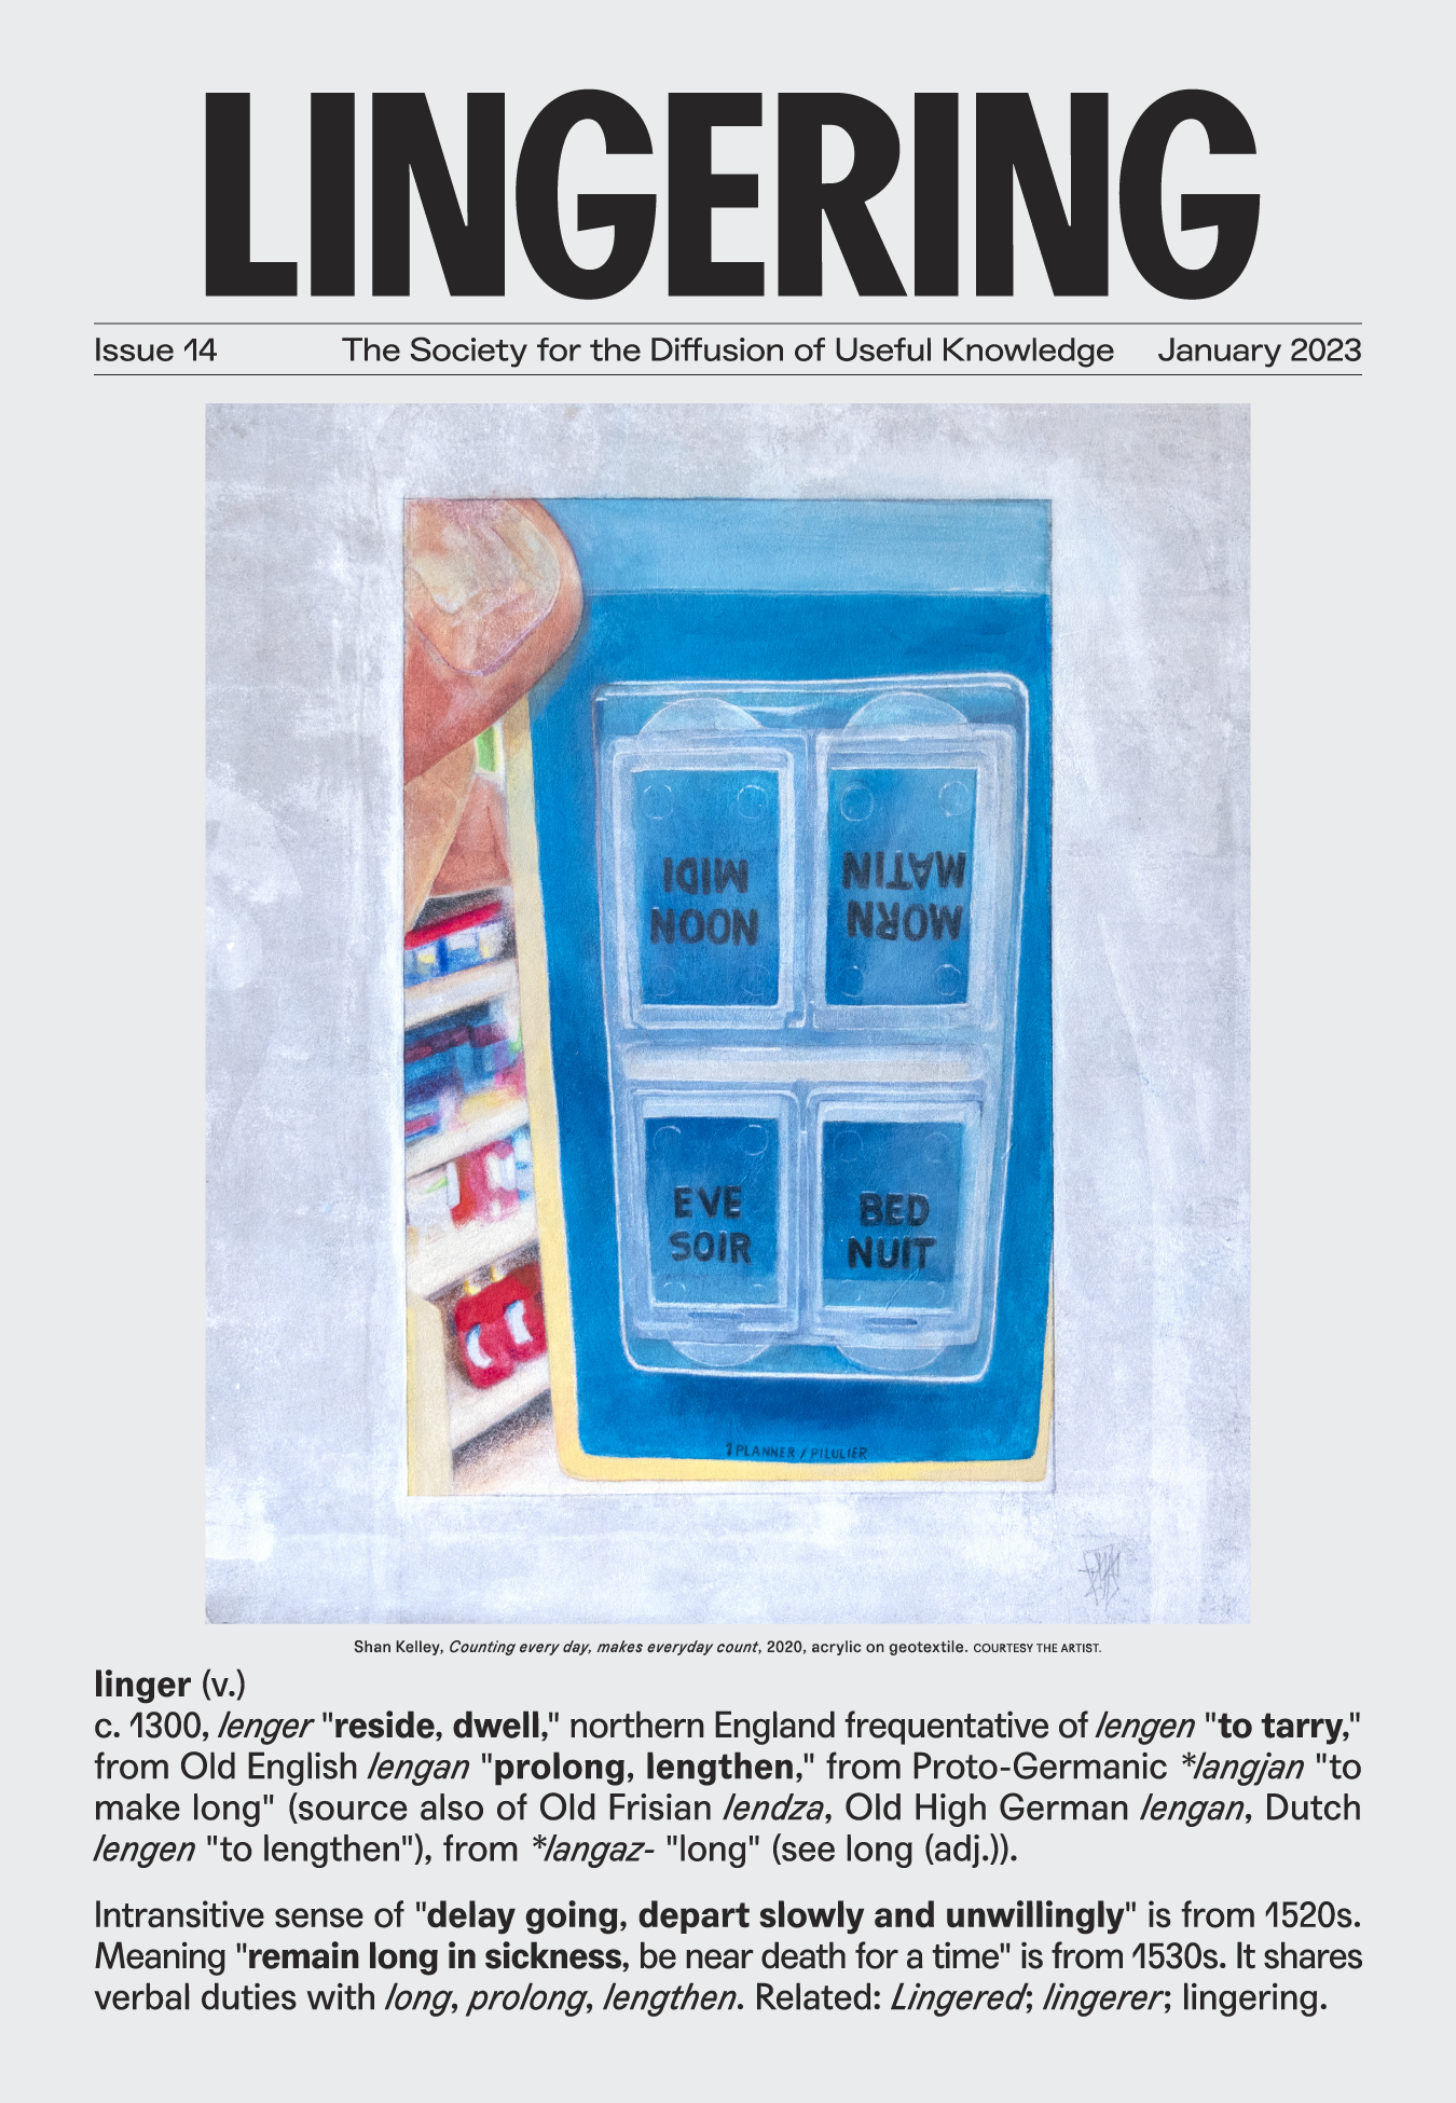 The cover of a publication called LINGERING shows a drawing work by Shan Kelley of a pill box for 4 times of the day.